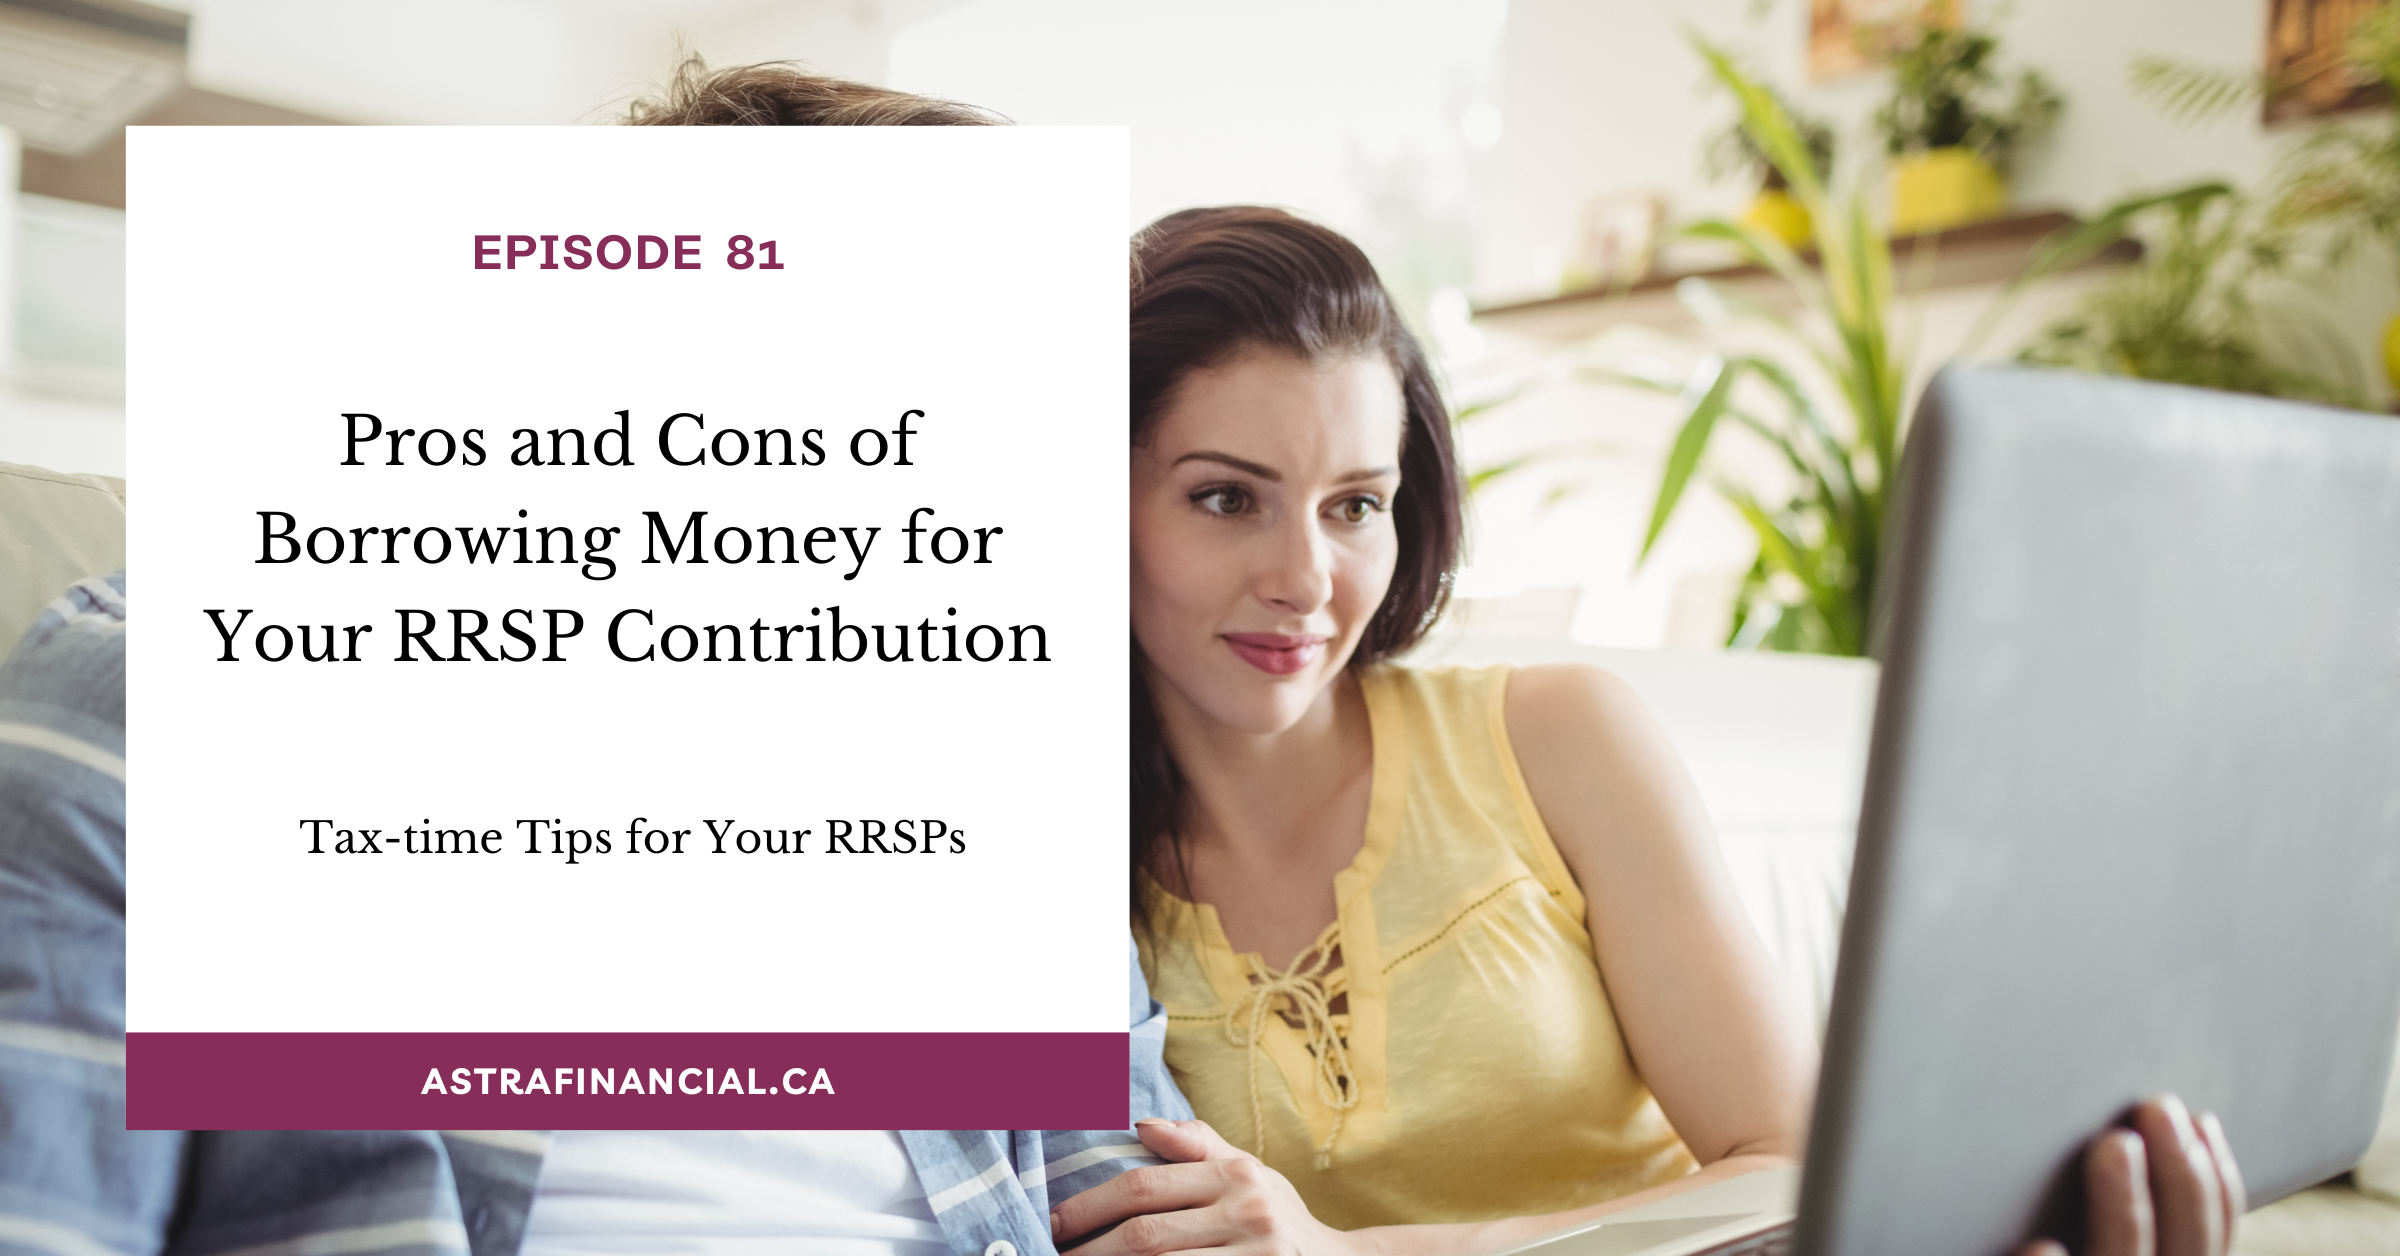 Pros and Cons of Borrowing Money for Your RRSP Contribution by Astra Financial